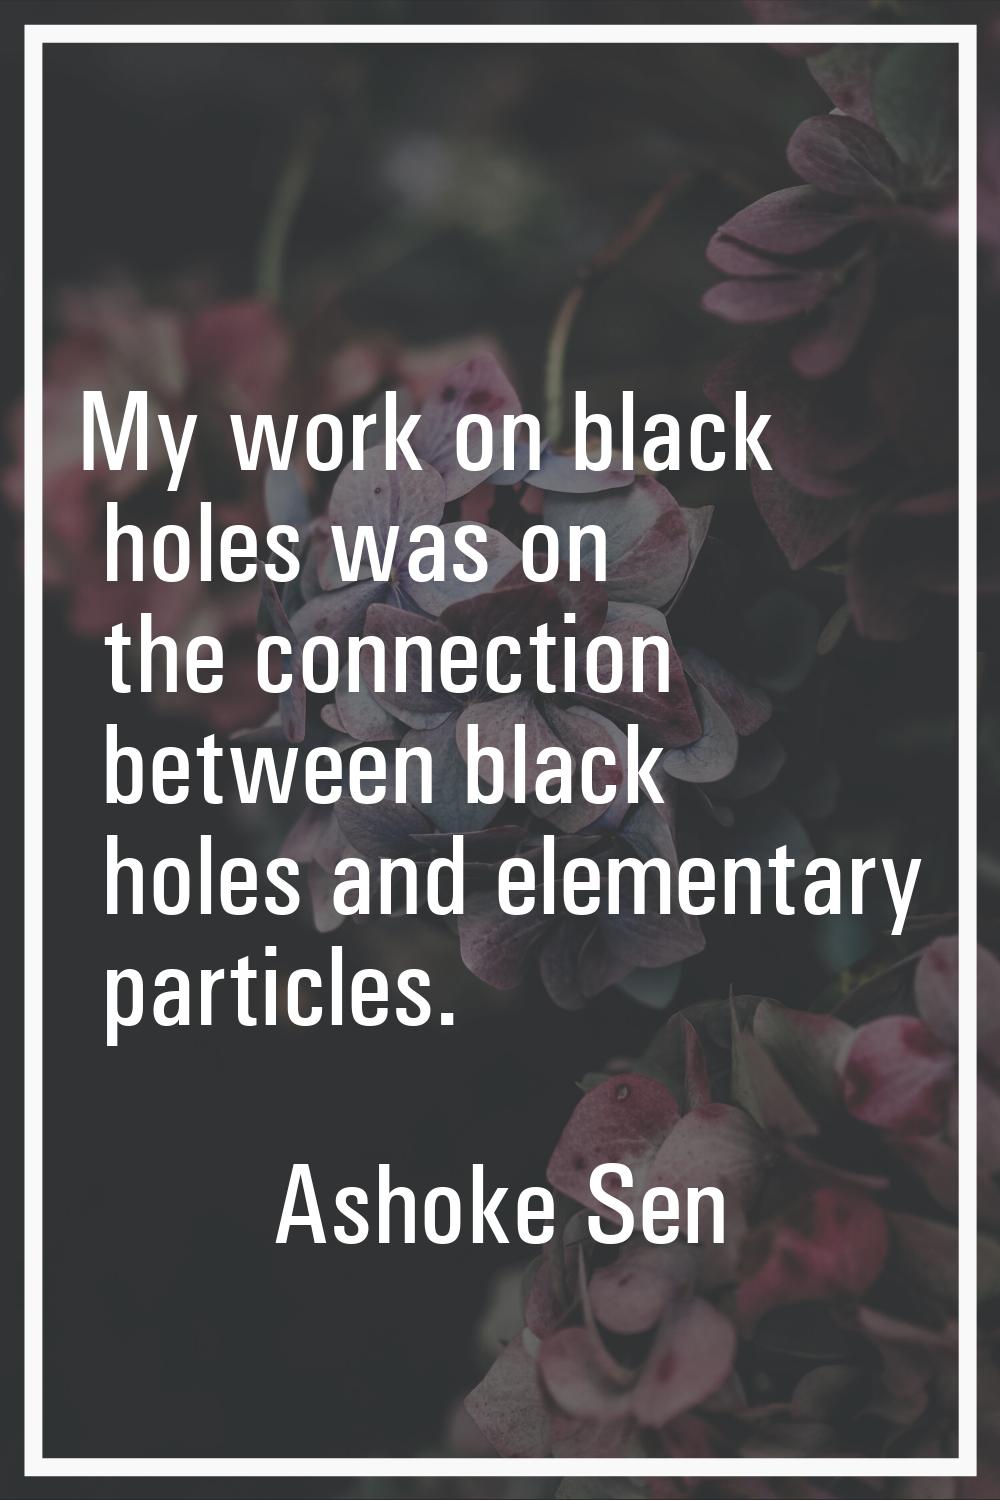 My work on black holes was on the connection between black holes and elementary particles.